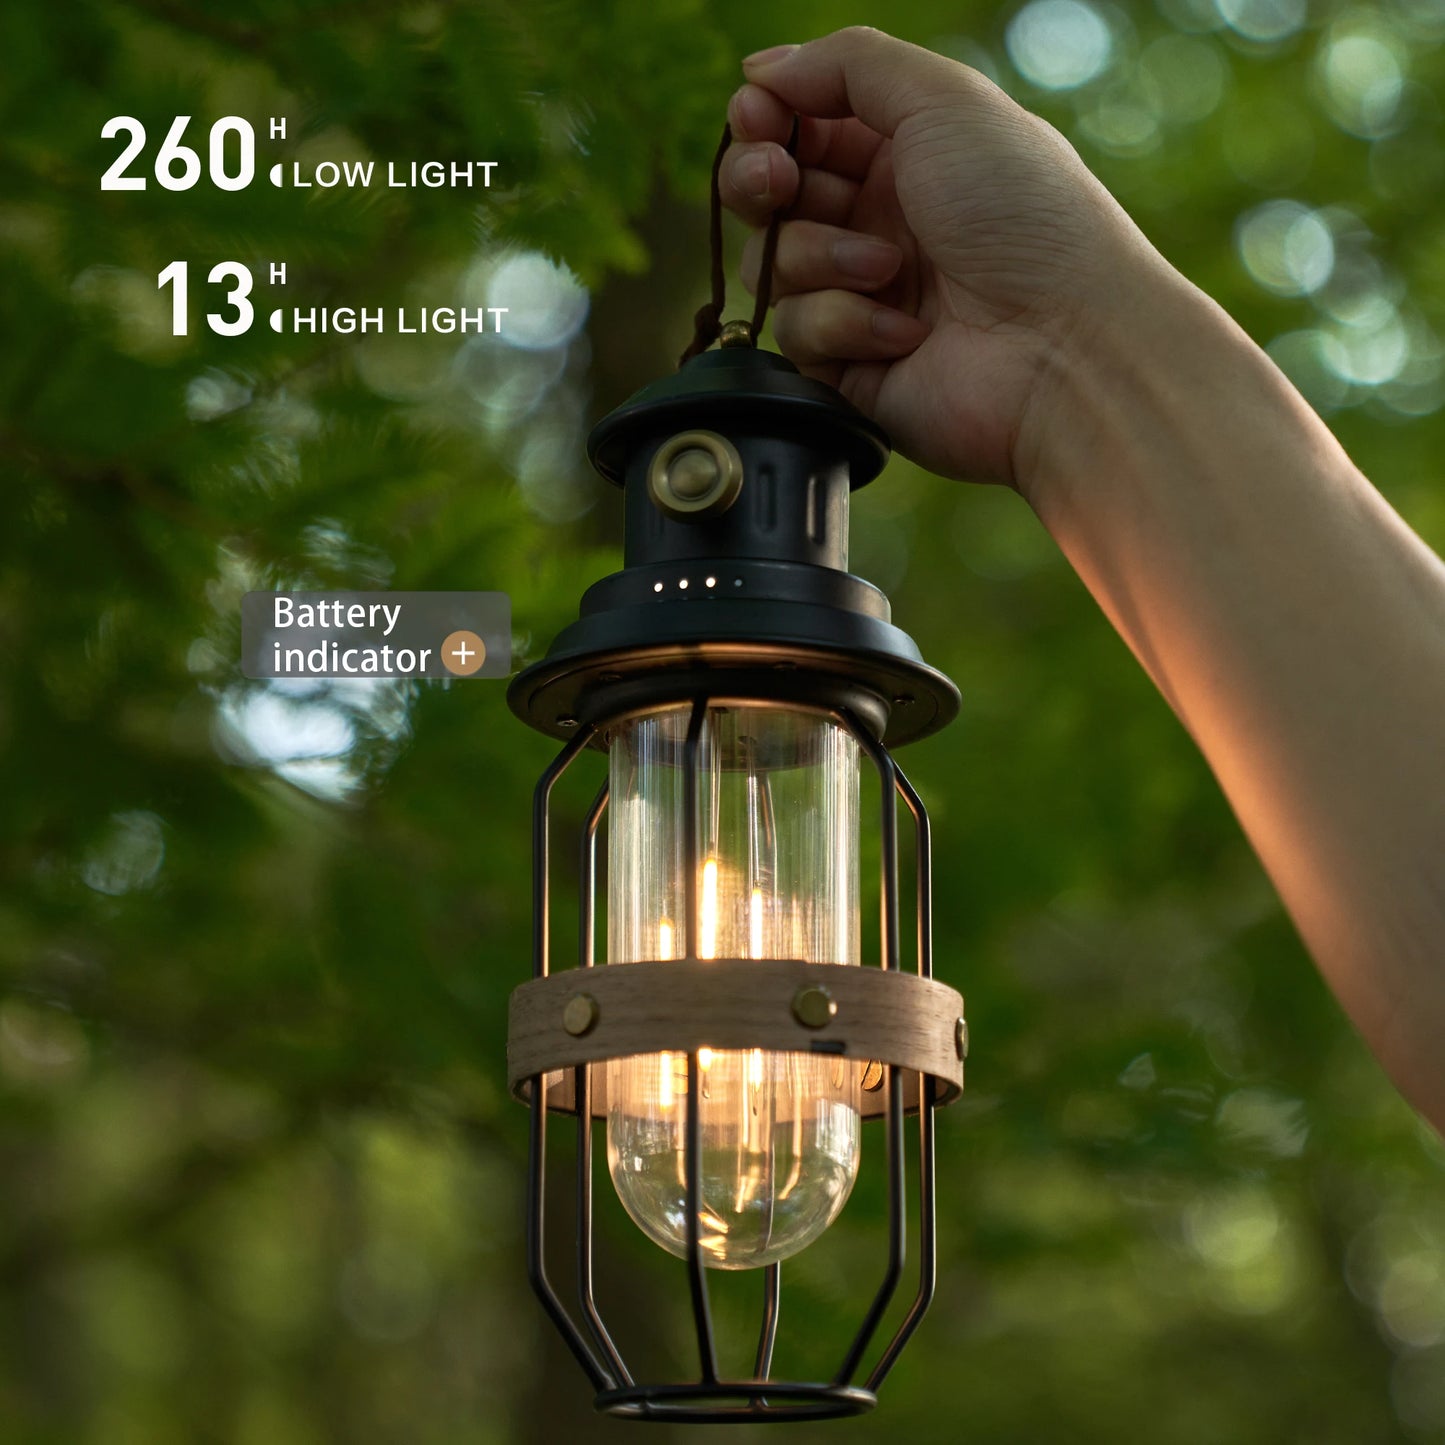 MOBI GARDEN Hanging and Stand Flexibility Camping Lantern